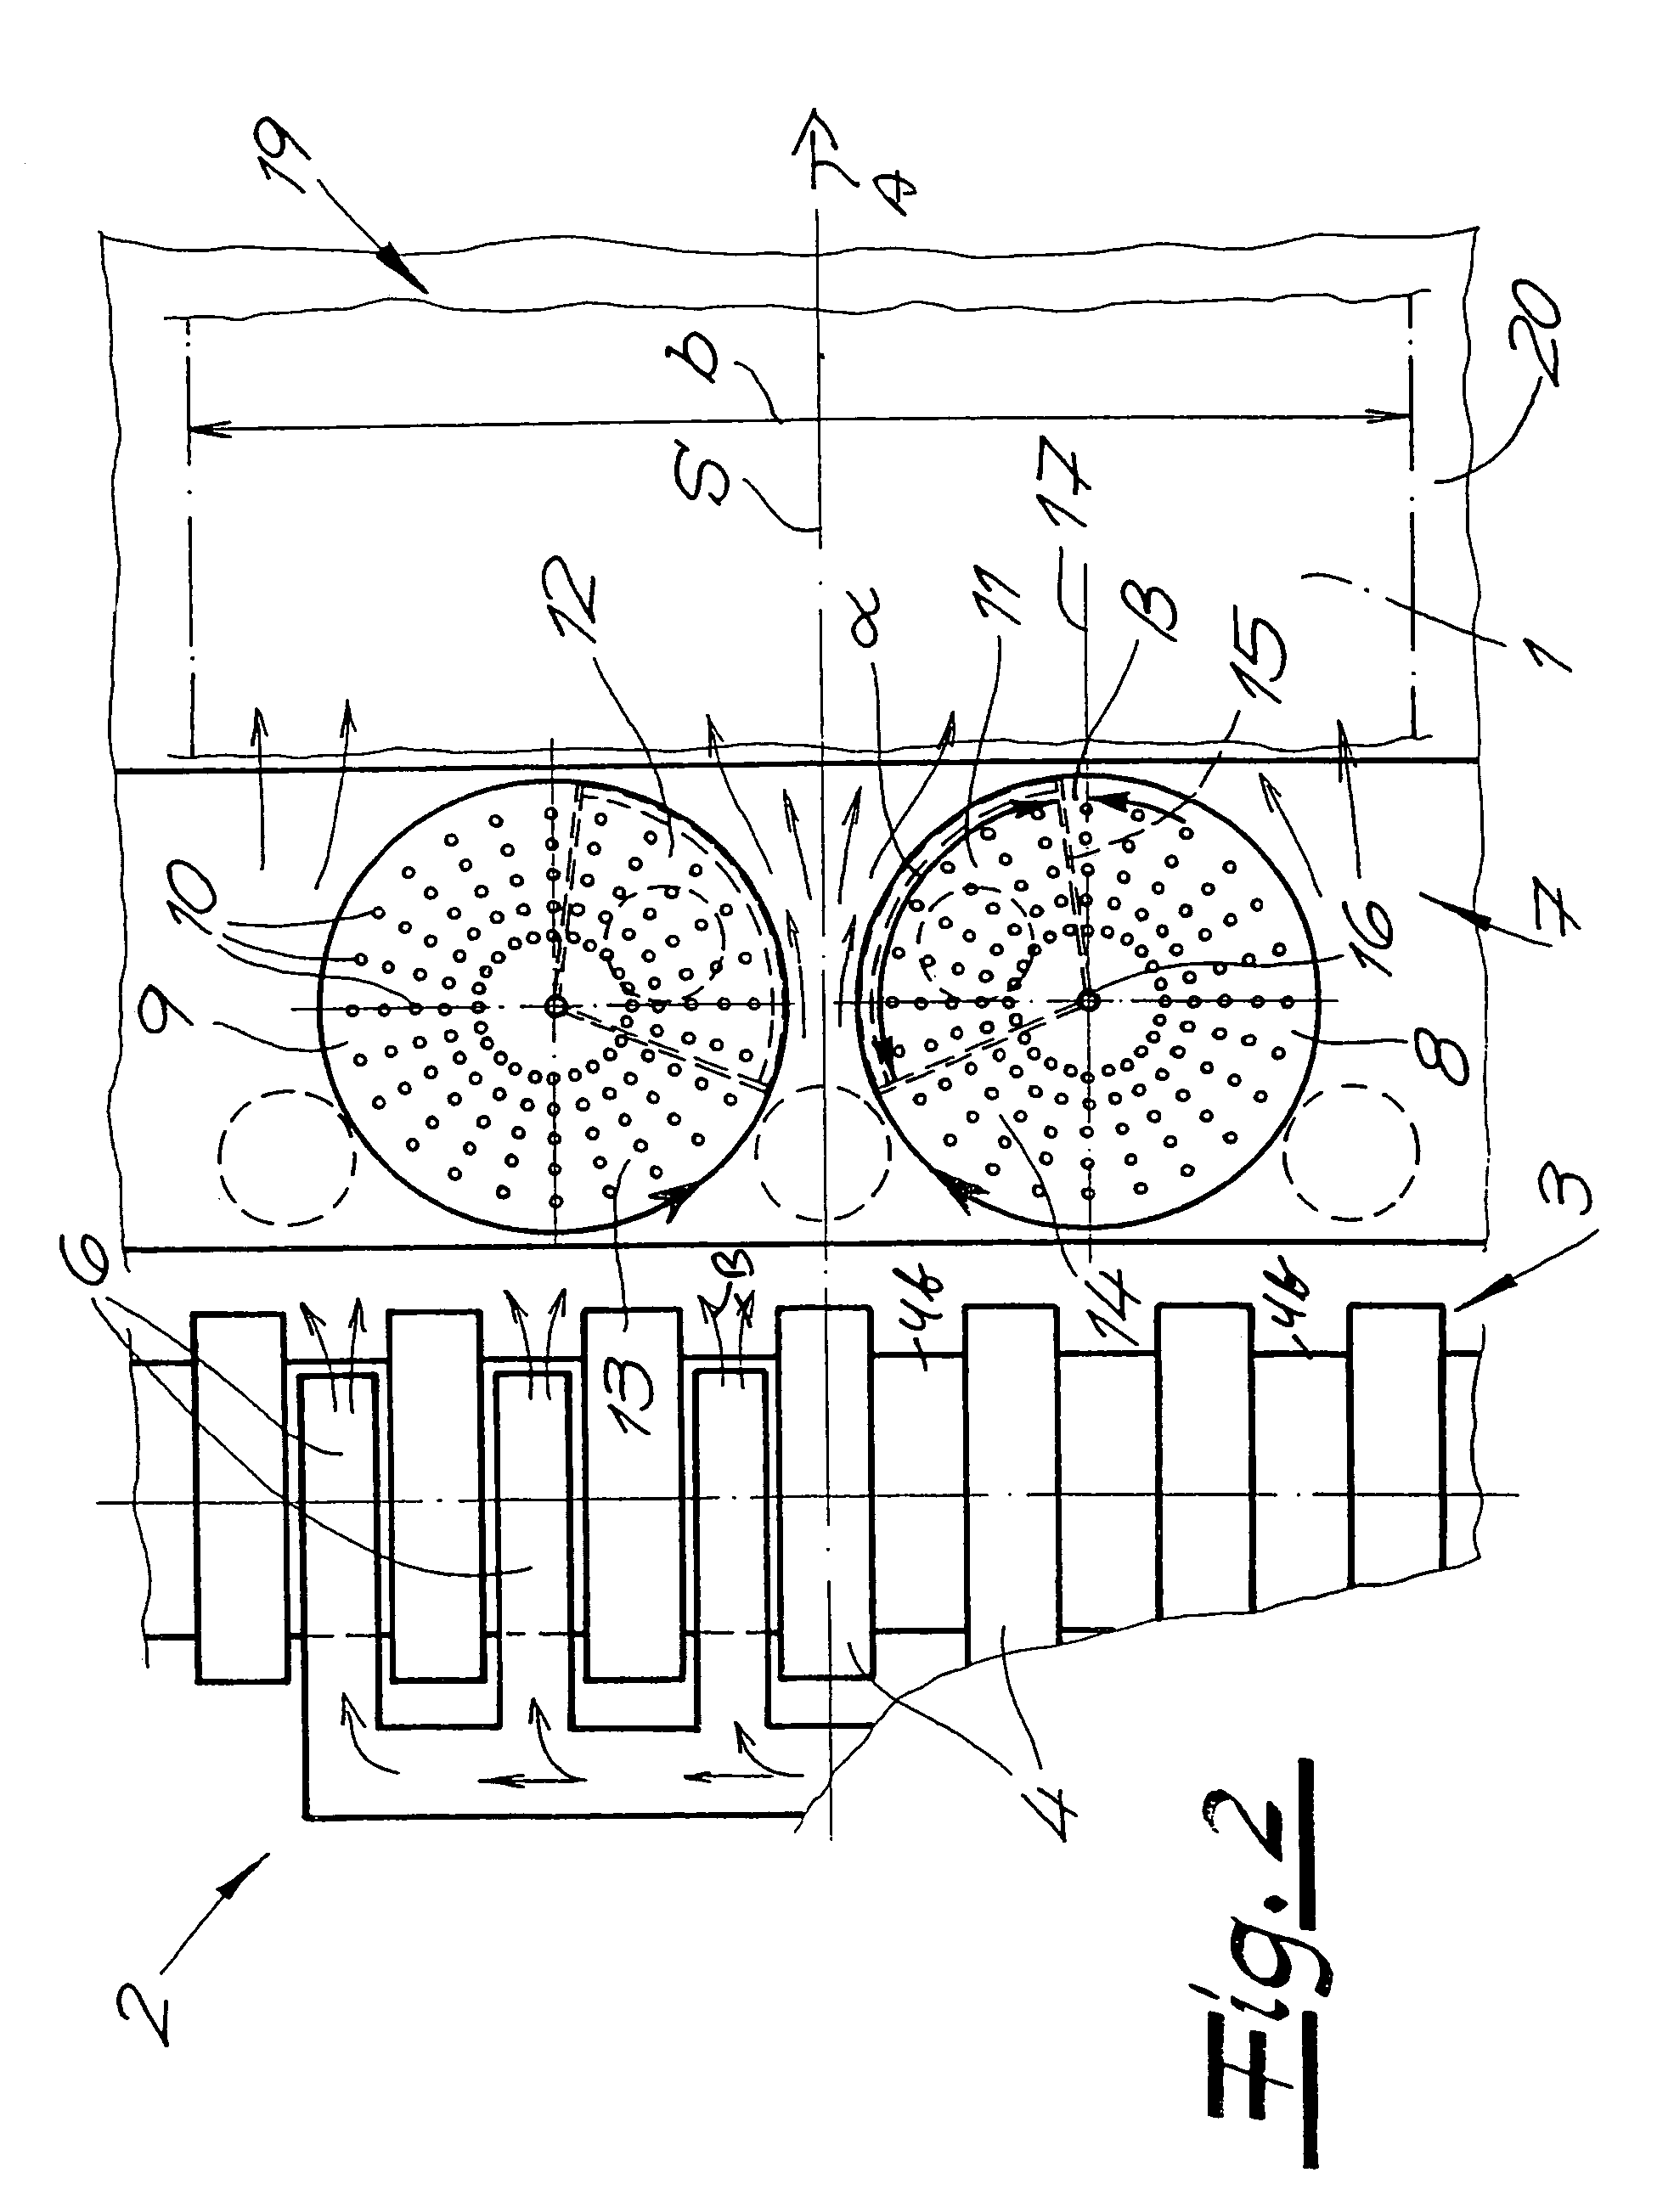 Delivery apparatus for flat articles, especially rotary cut sheets